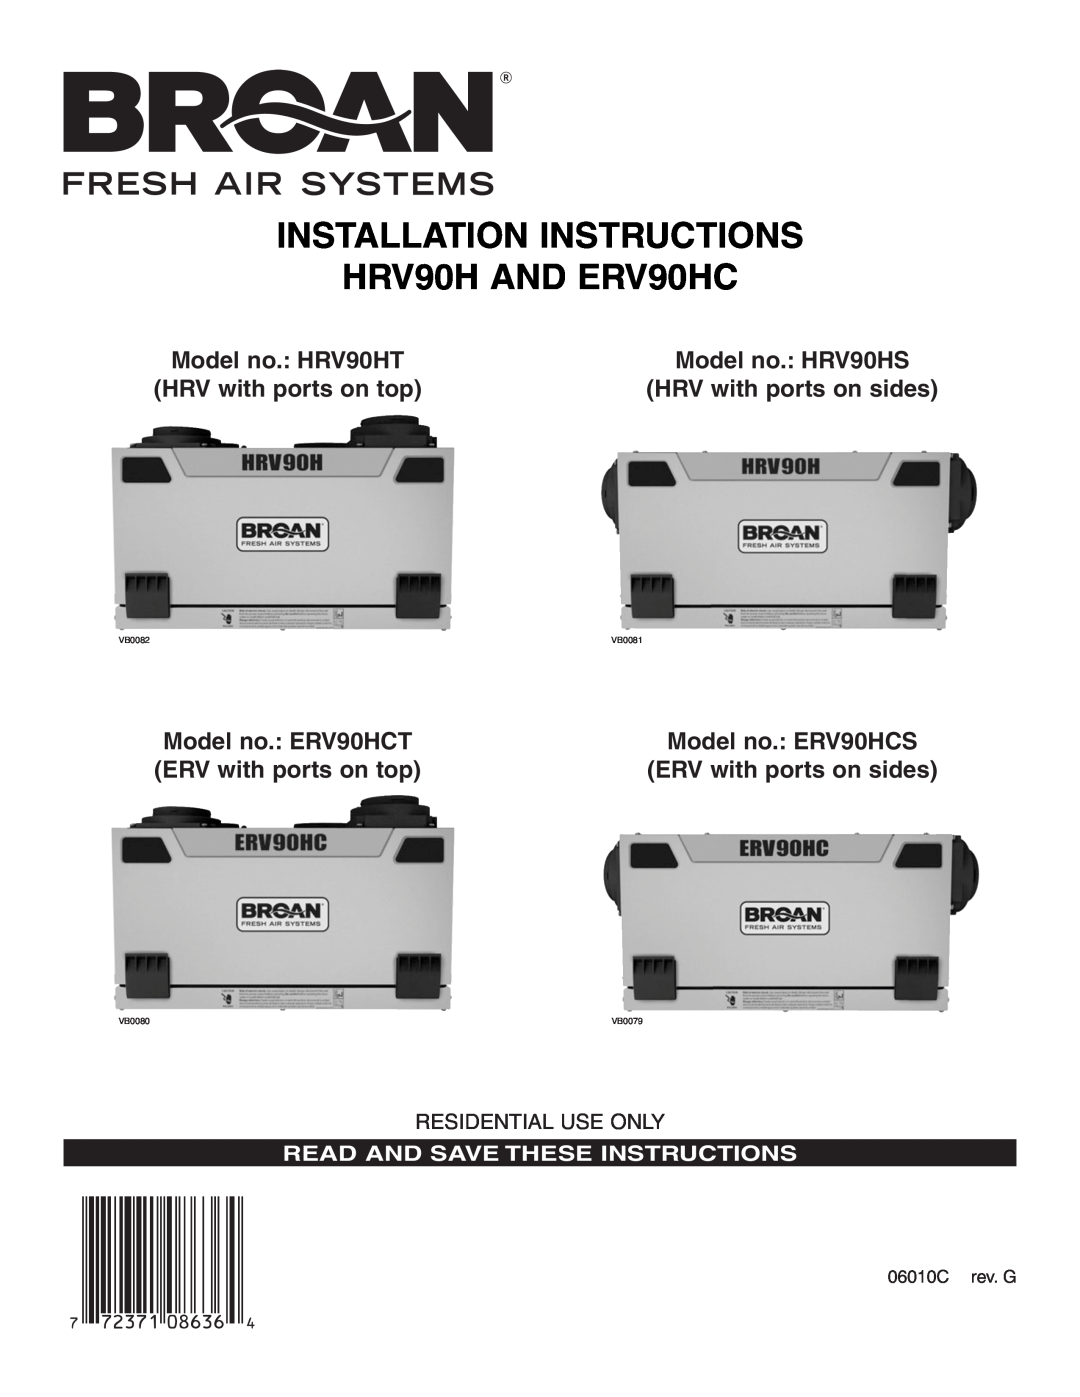 Broan ERV90HCT installation instructions INSTALLATION INSTRUCTIONS HRV90H AND ERV90HC, HRV with ports on top 